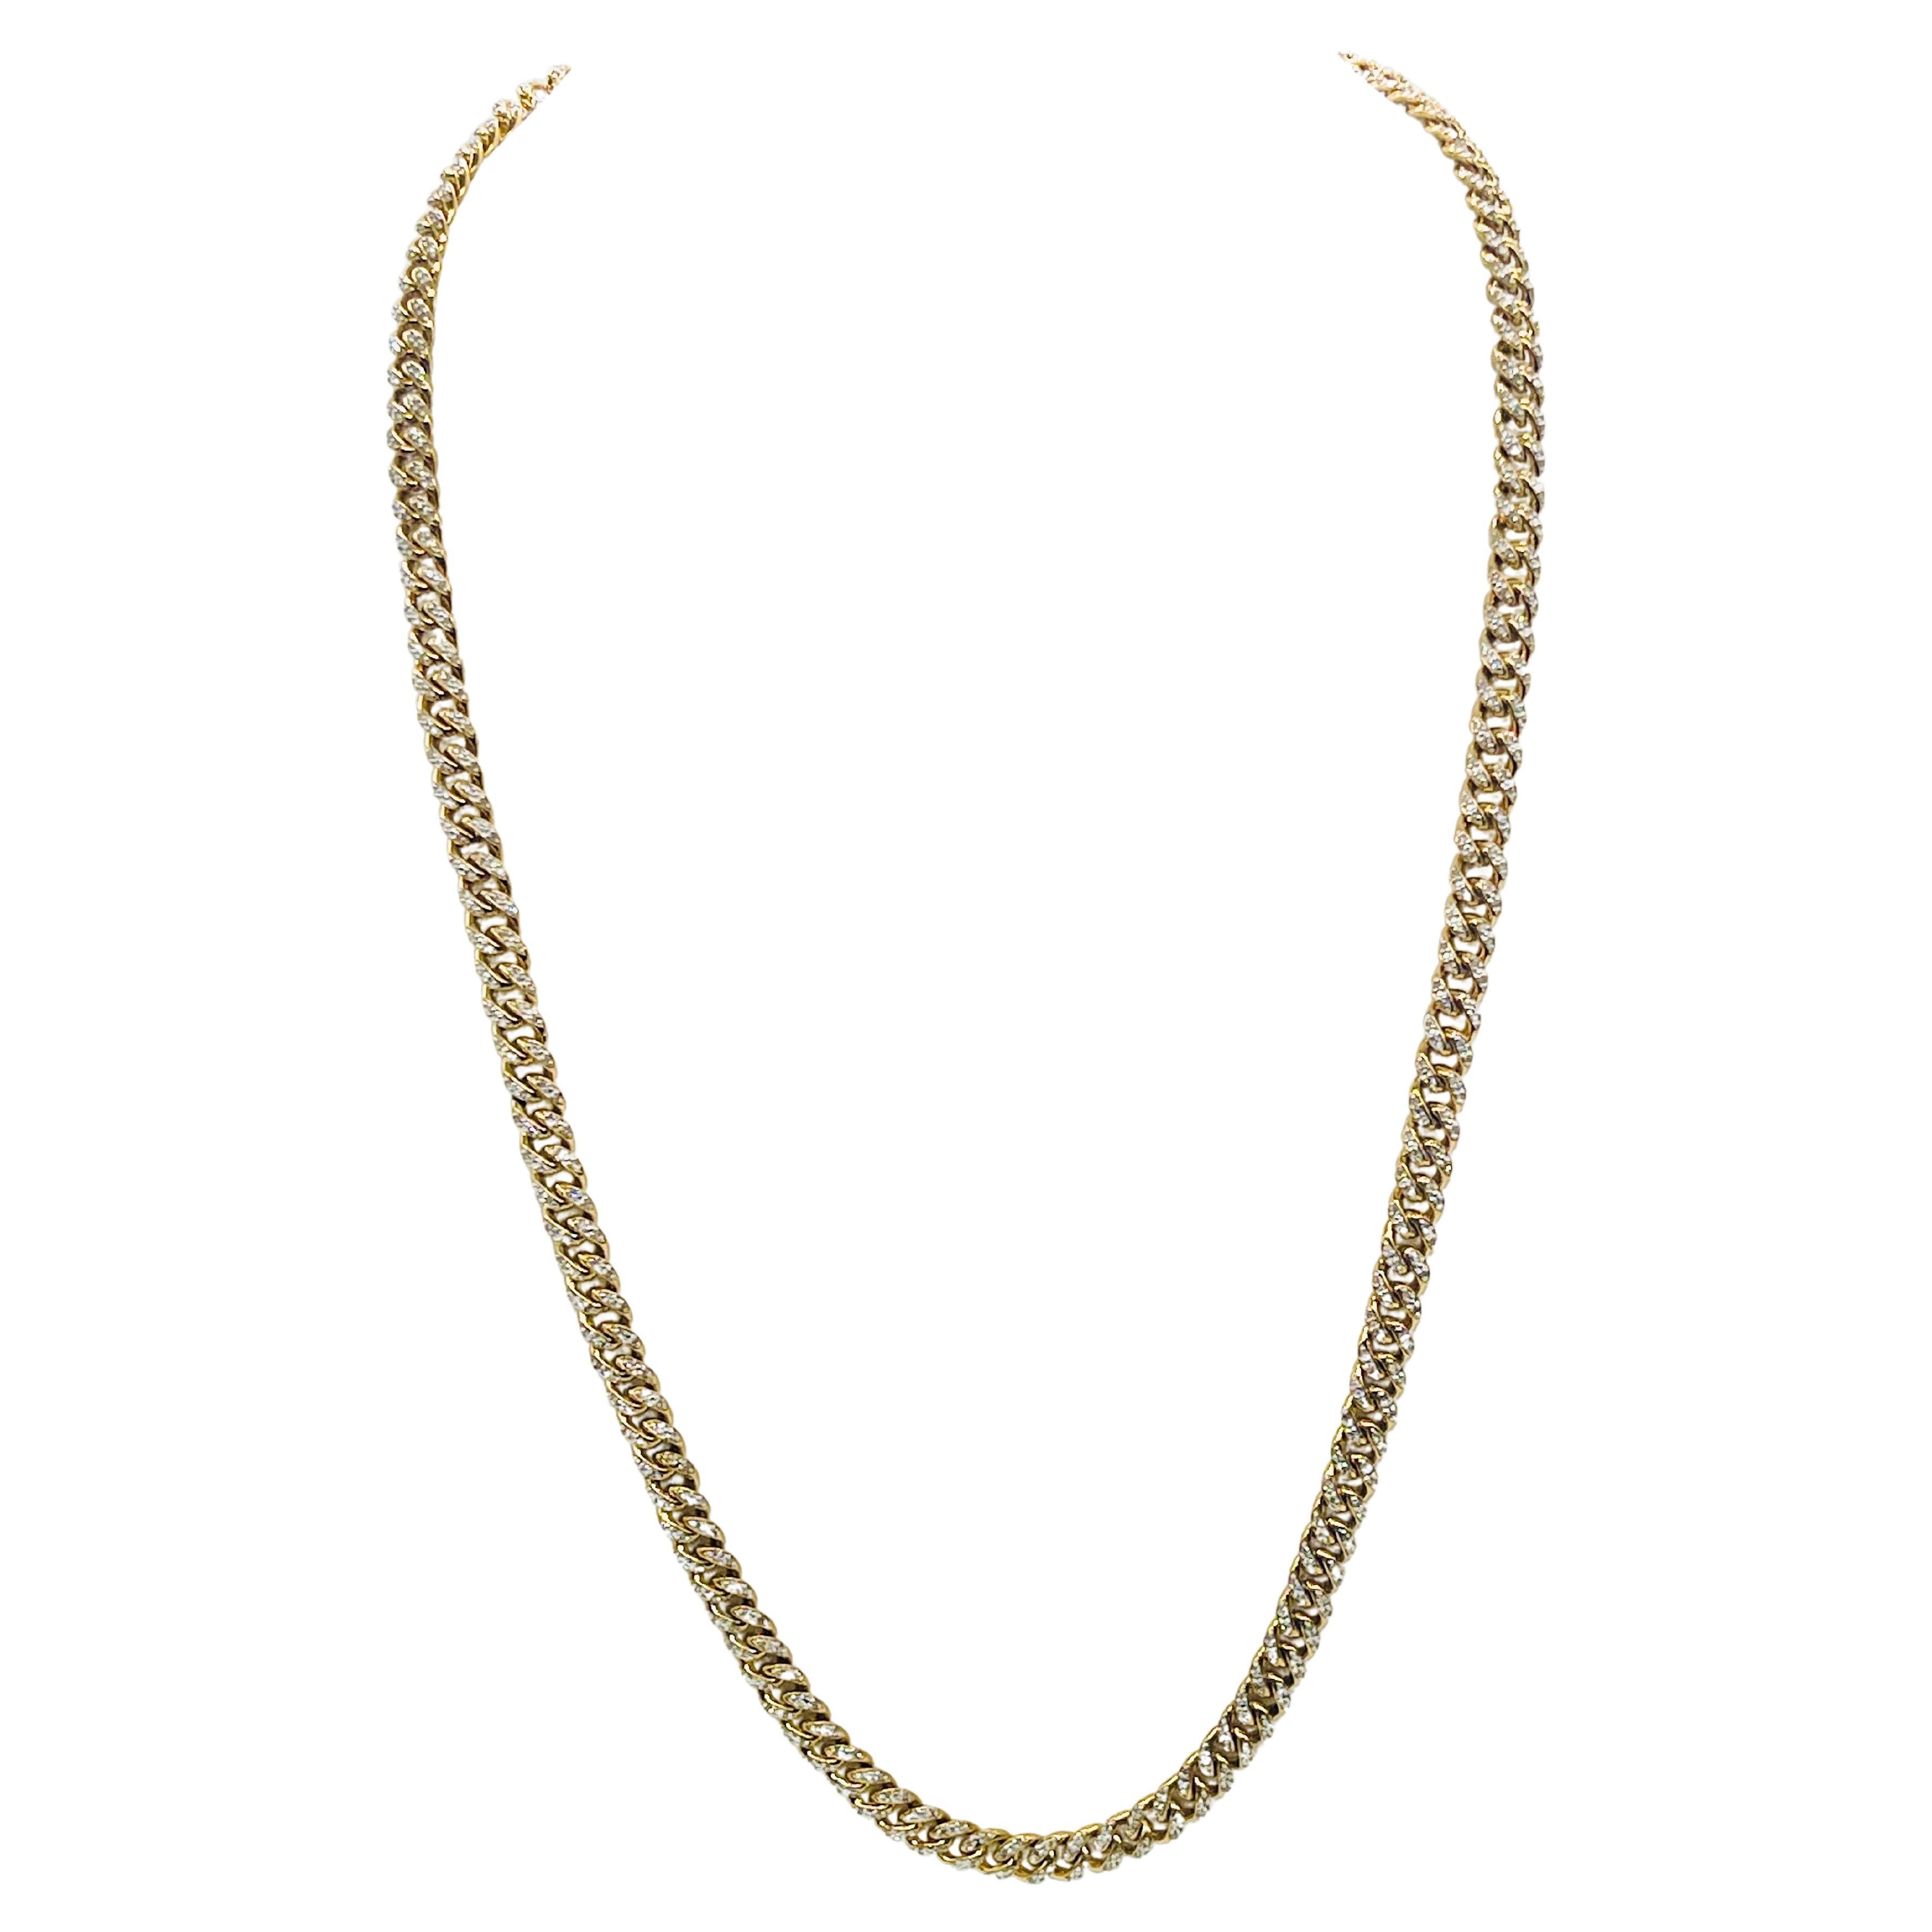 Dazzling and elegant 10K gold with fully rhodium on top, adorned with 2.05 carats all natural diamonds cuban link chain necklace in 22 inch length, 6mm width average G-I, 48.60 grams.
*Free shipping within the U.S.*